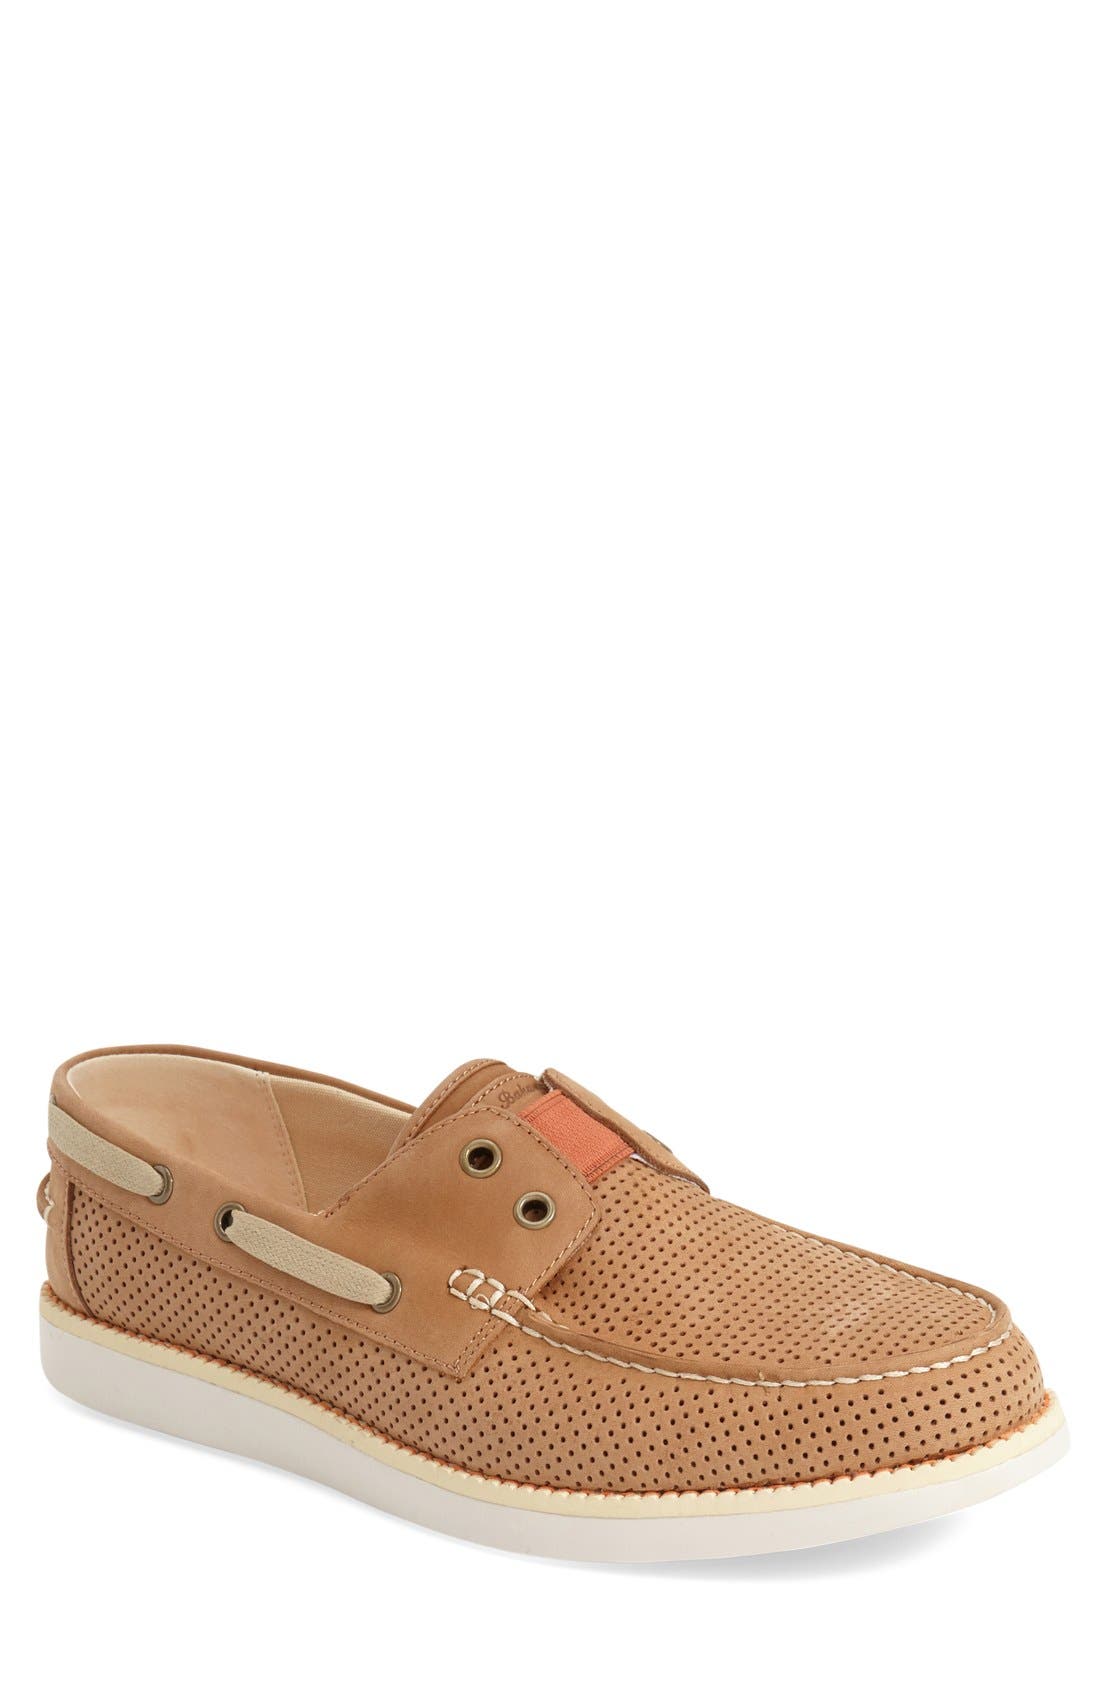 tommy bahama relaxology mens shoes